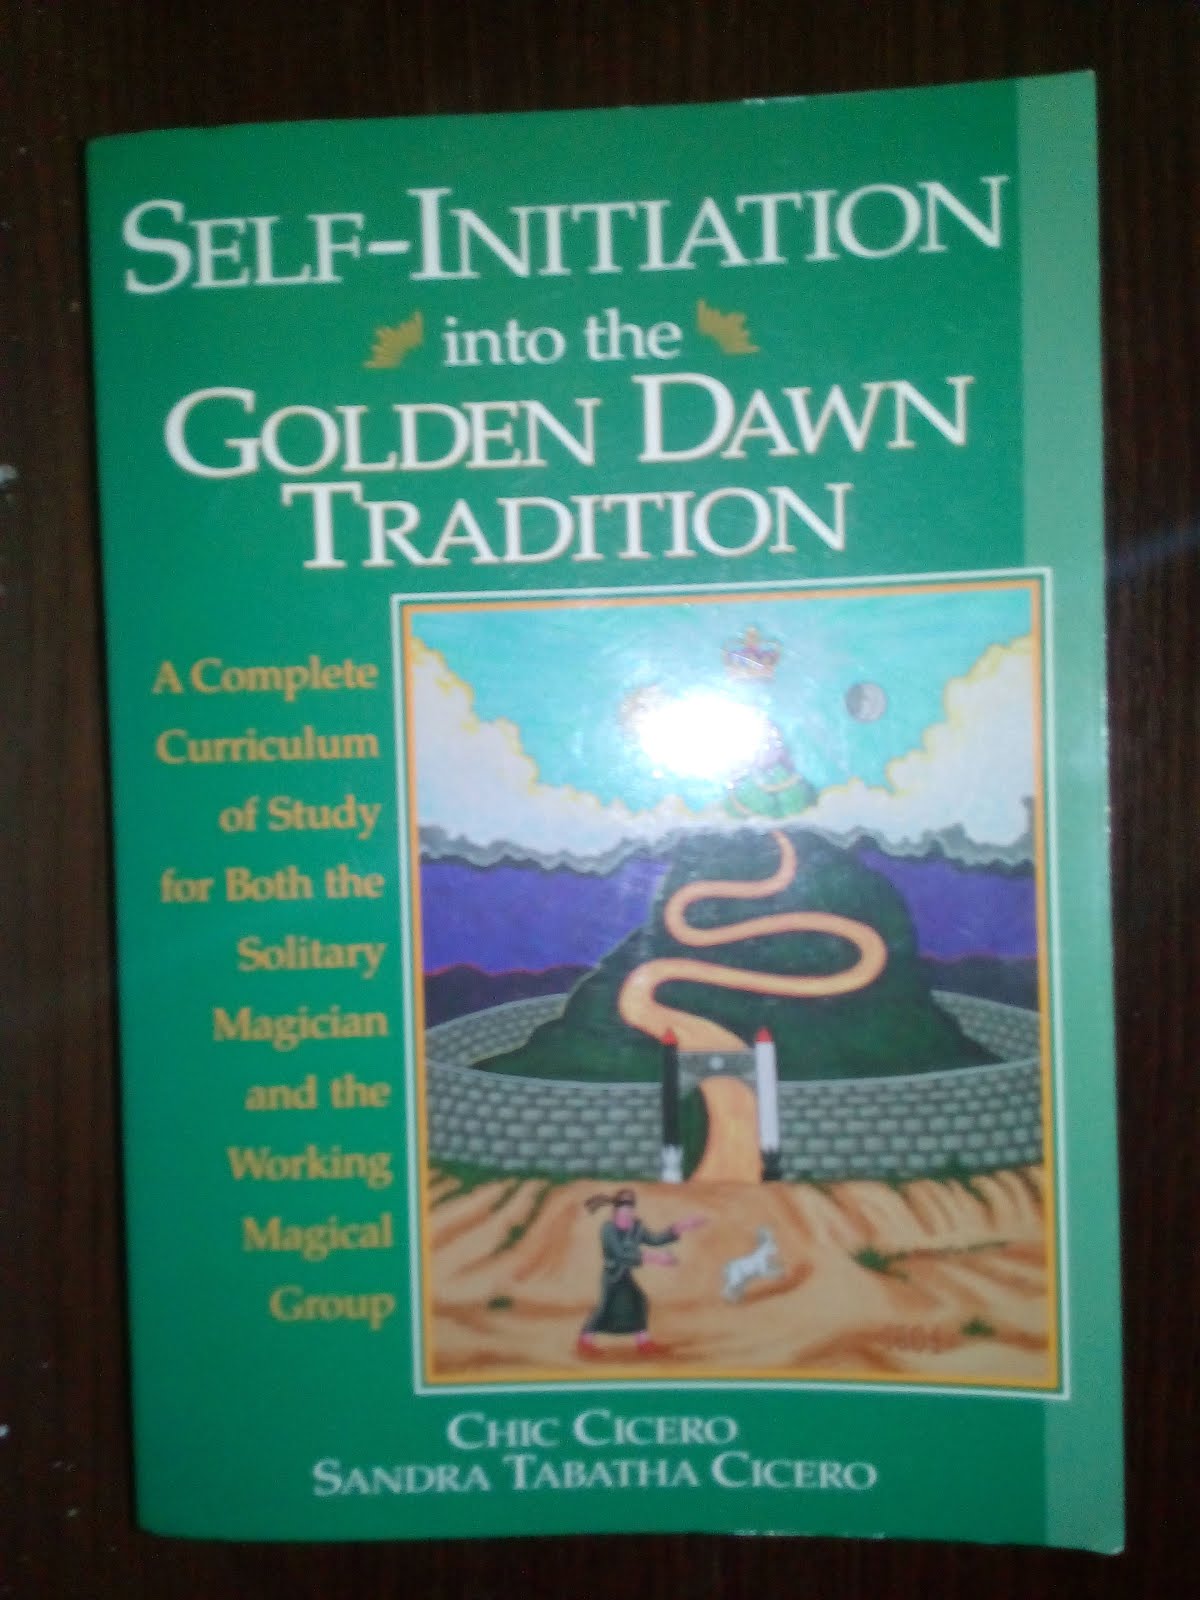 'Self-Initiation into the Golden Dawn Tradition' book by Chic Cicero & Sandra Tabatha Cicero.